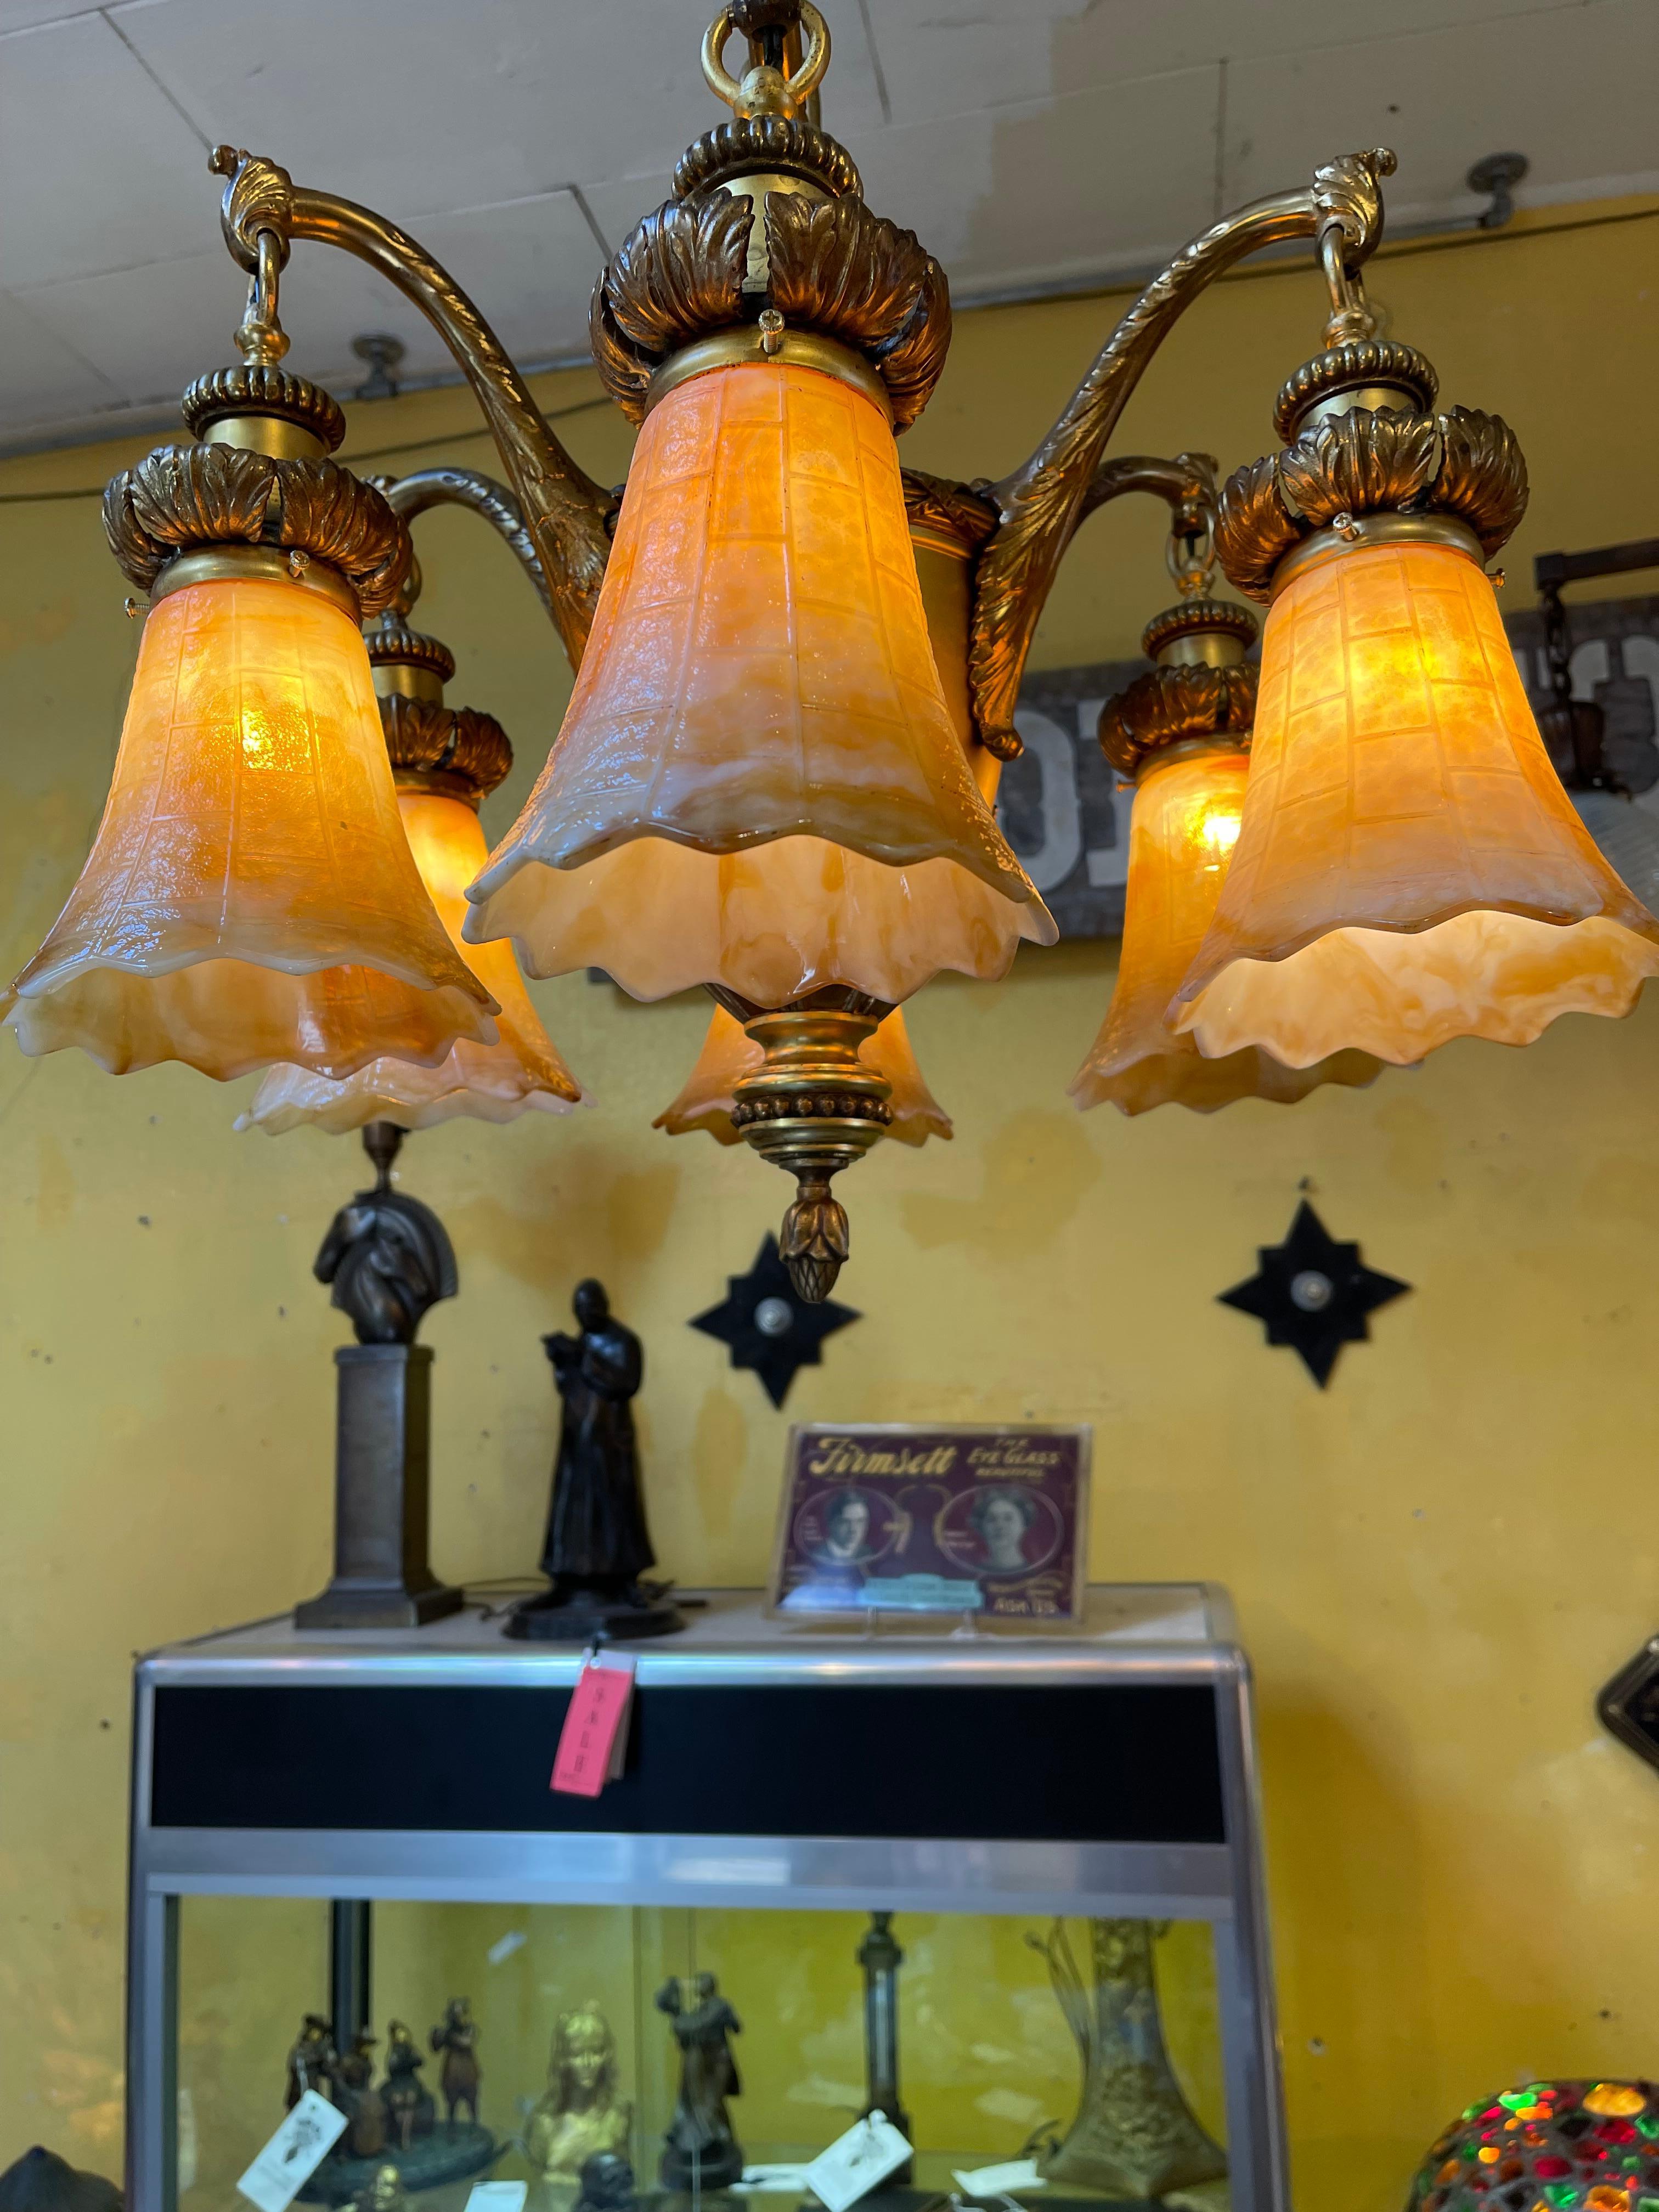 This most handsome chandelier has all the characteristics of a top quality example of Edwardian lighting. Looking at all the detailing on the body, arms, shade holders and even the canopy we see the excellent metal workmanship. Also to note there is